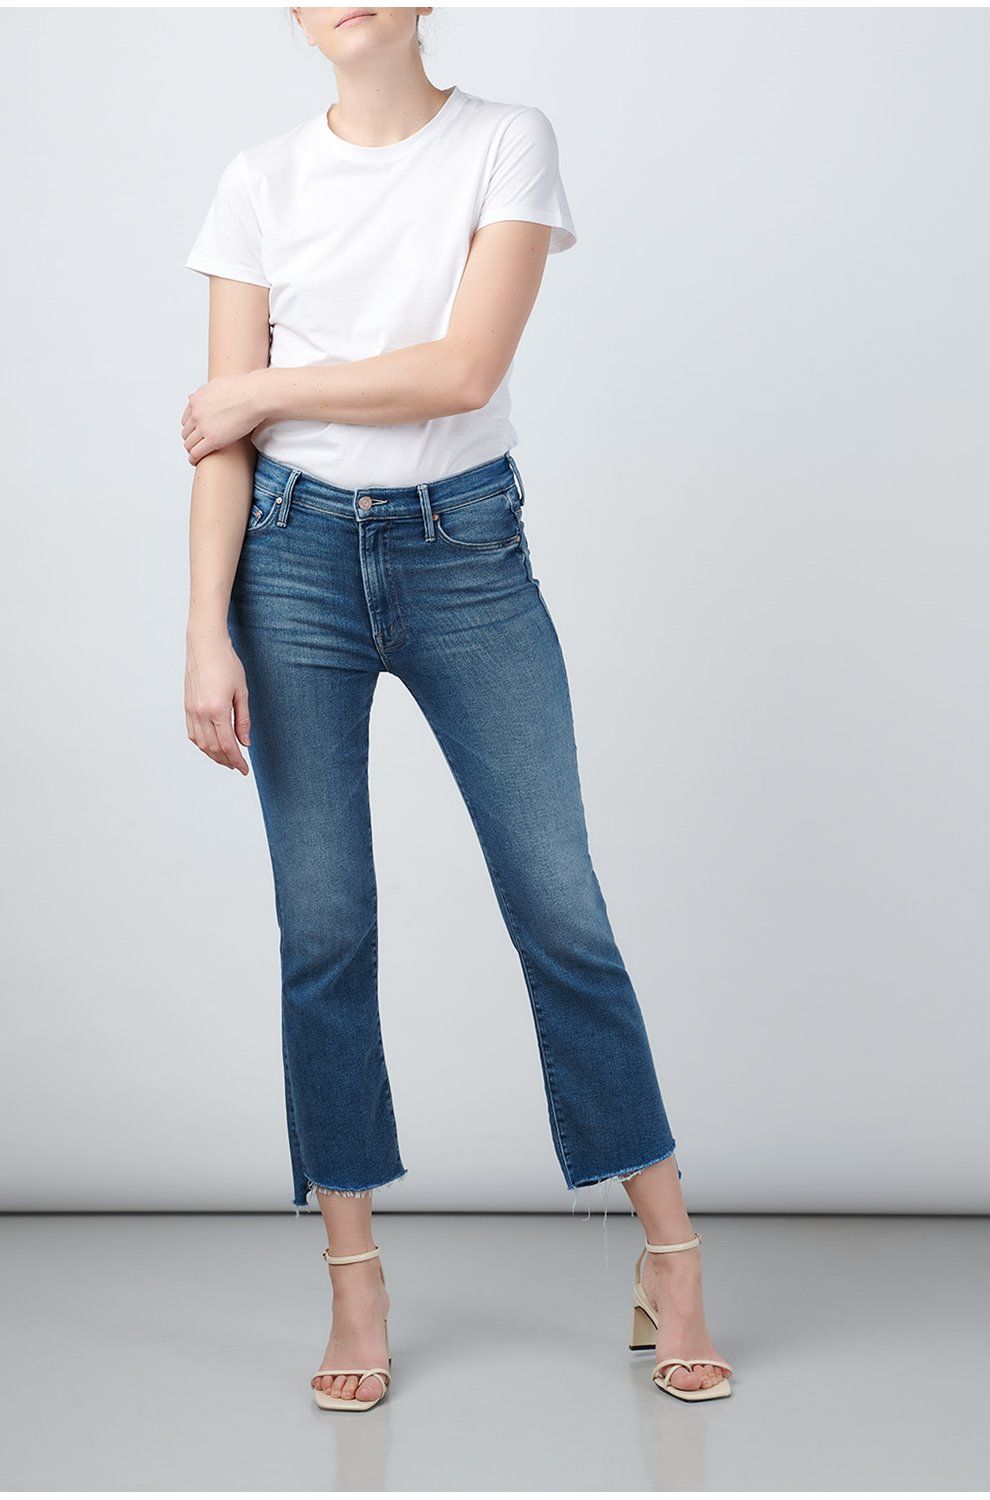 Trilogy Stores INSIDER CROP STEP FRAY JEAN IN HEY SUN